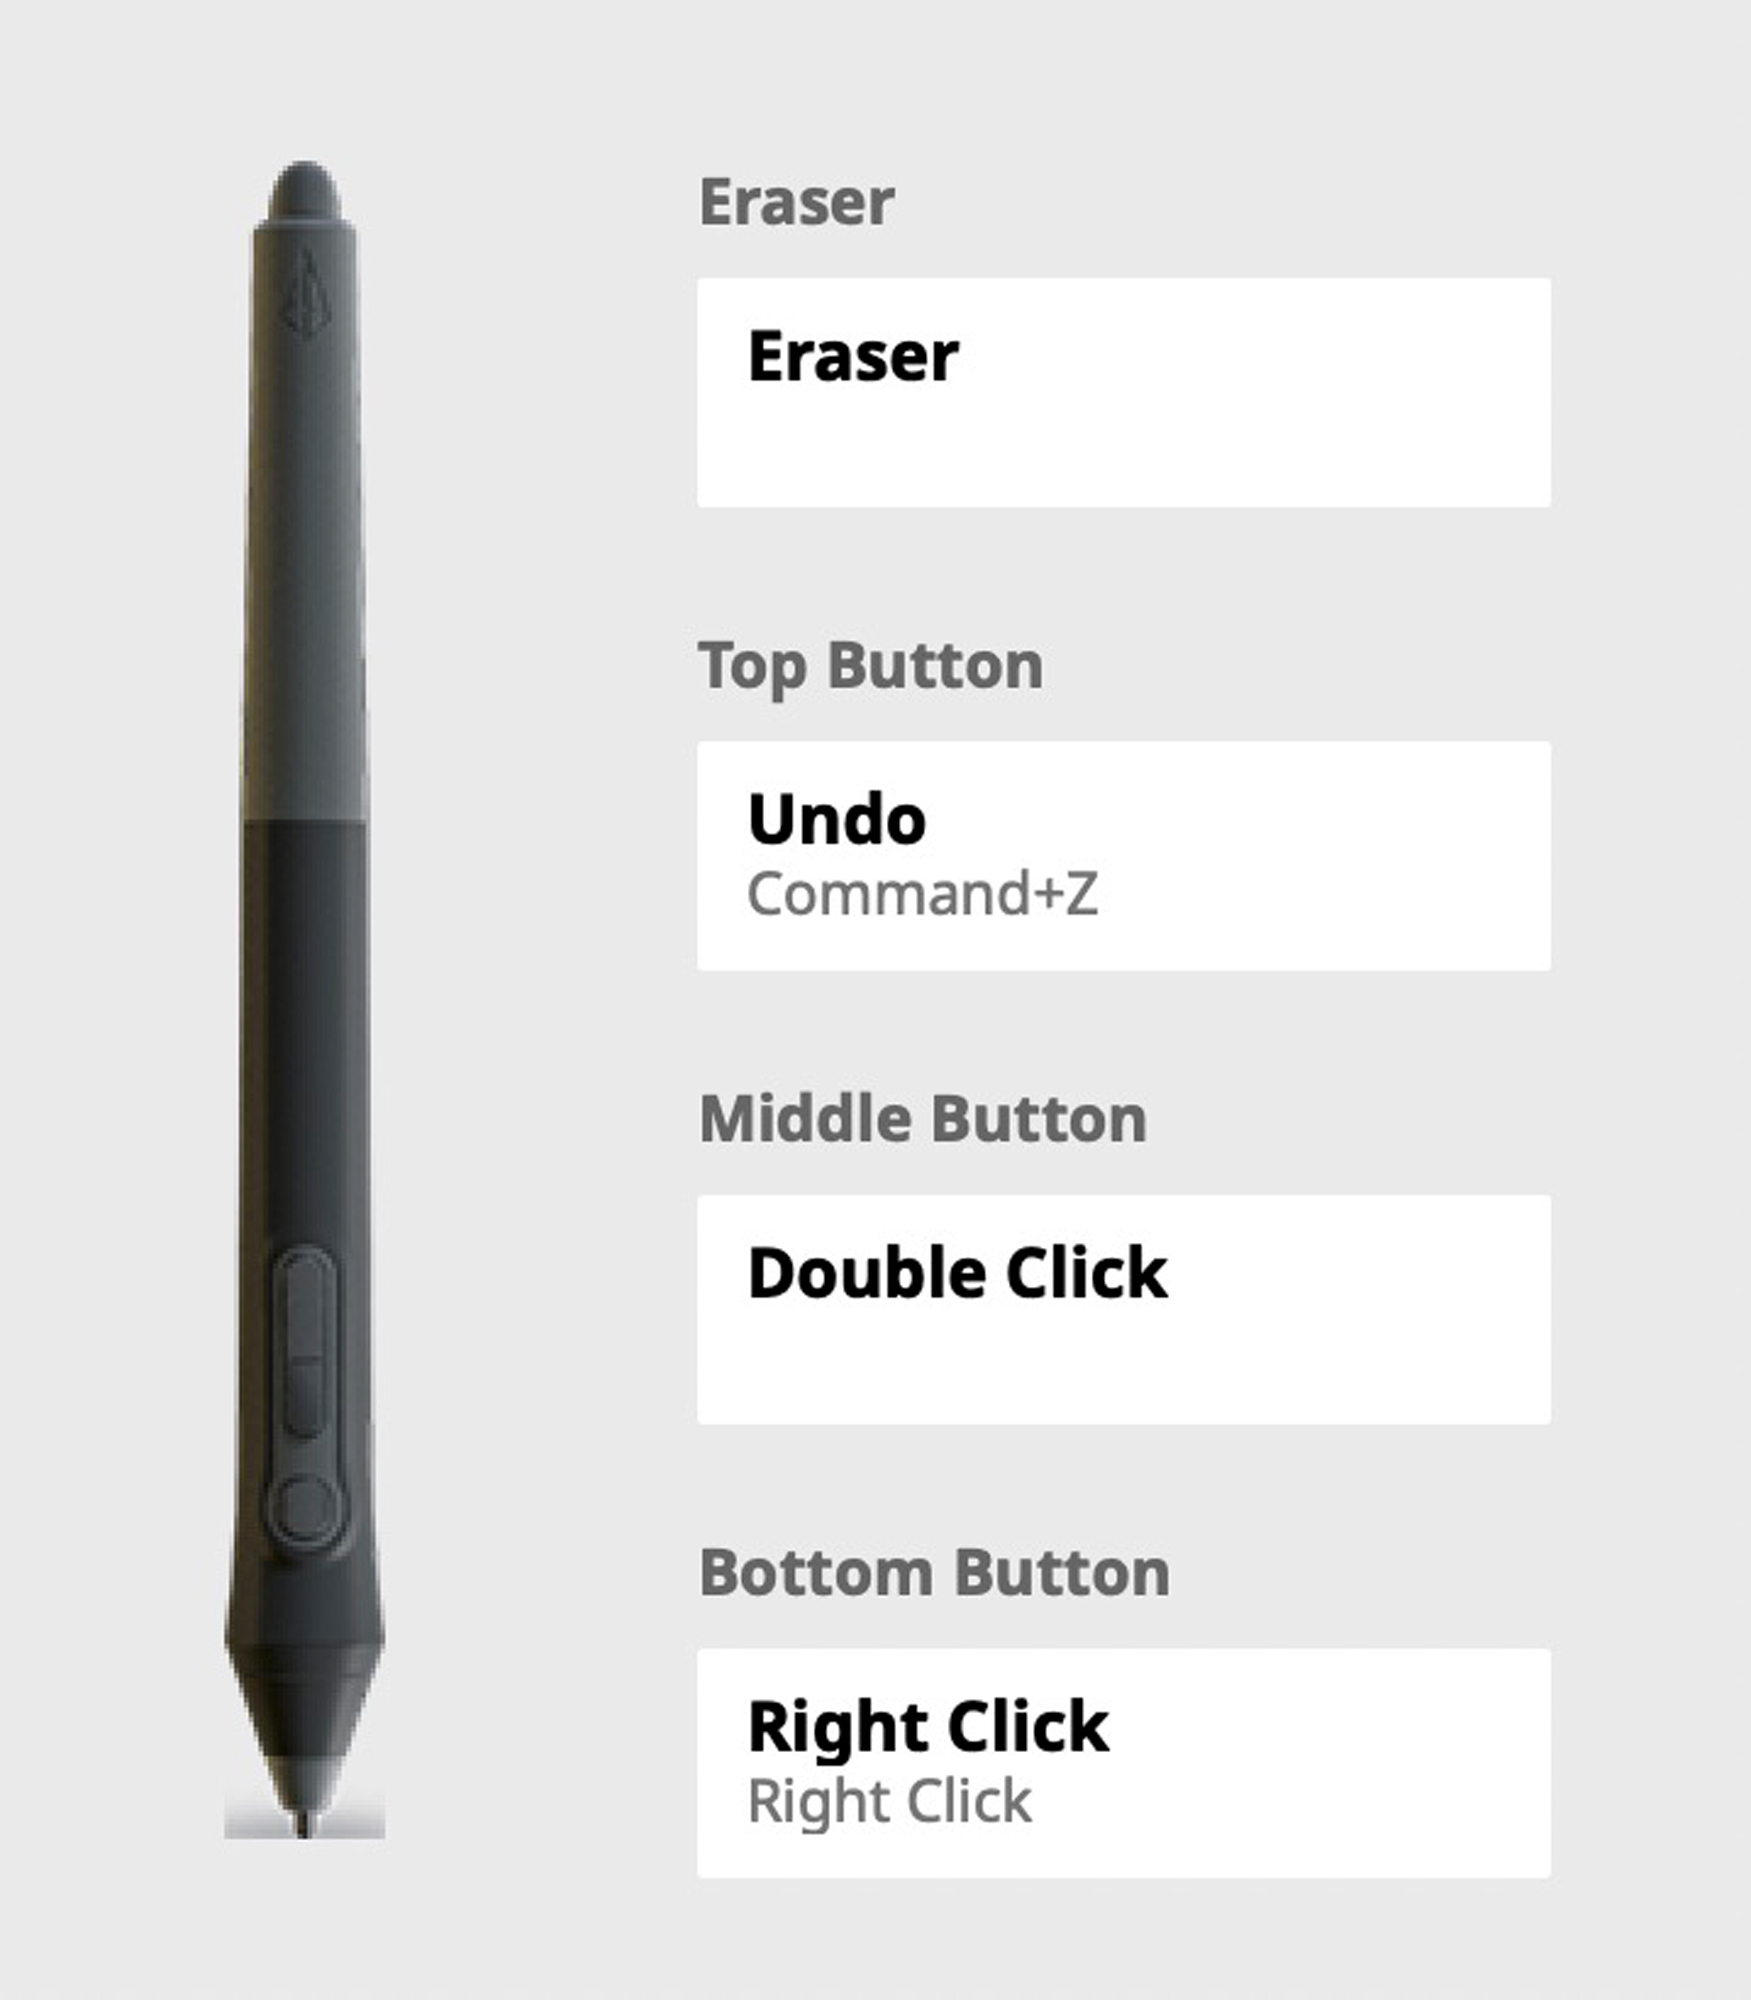 There a number of ways you can configure your pens